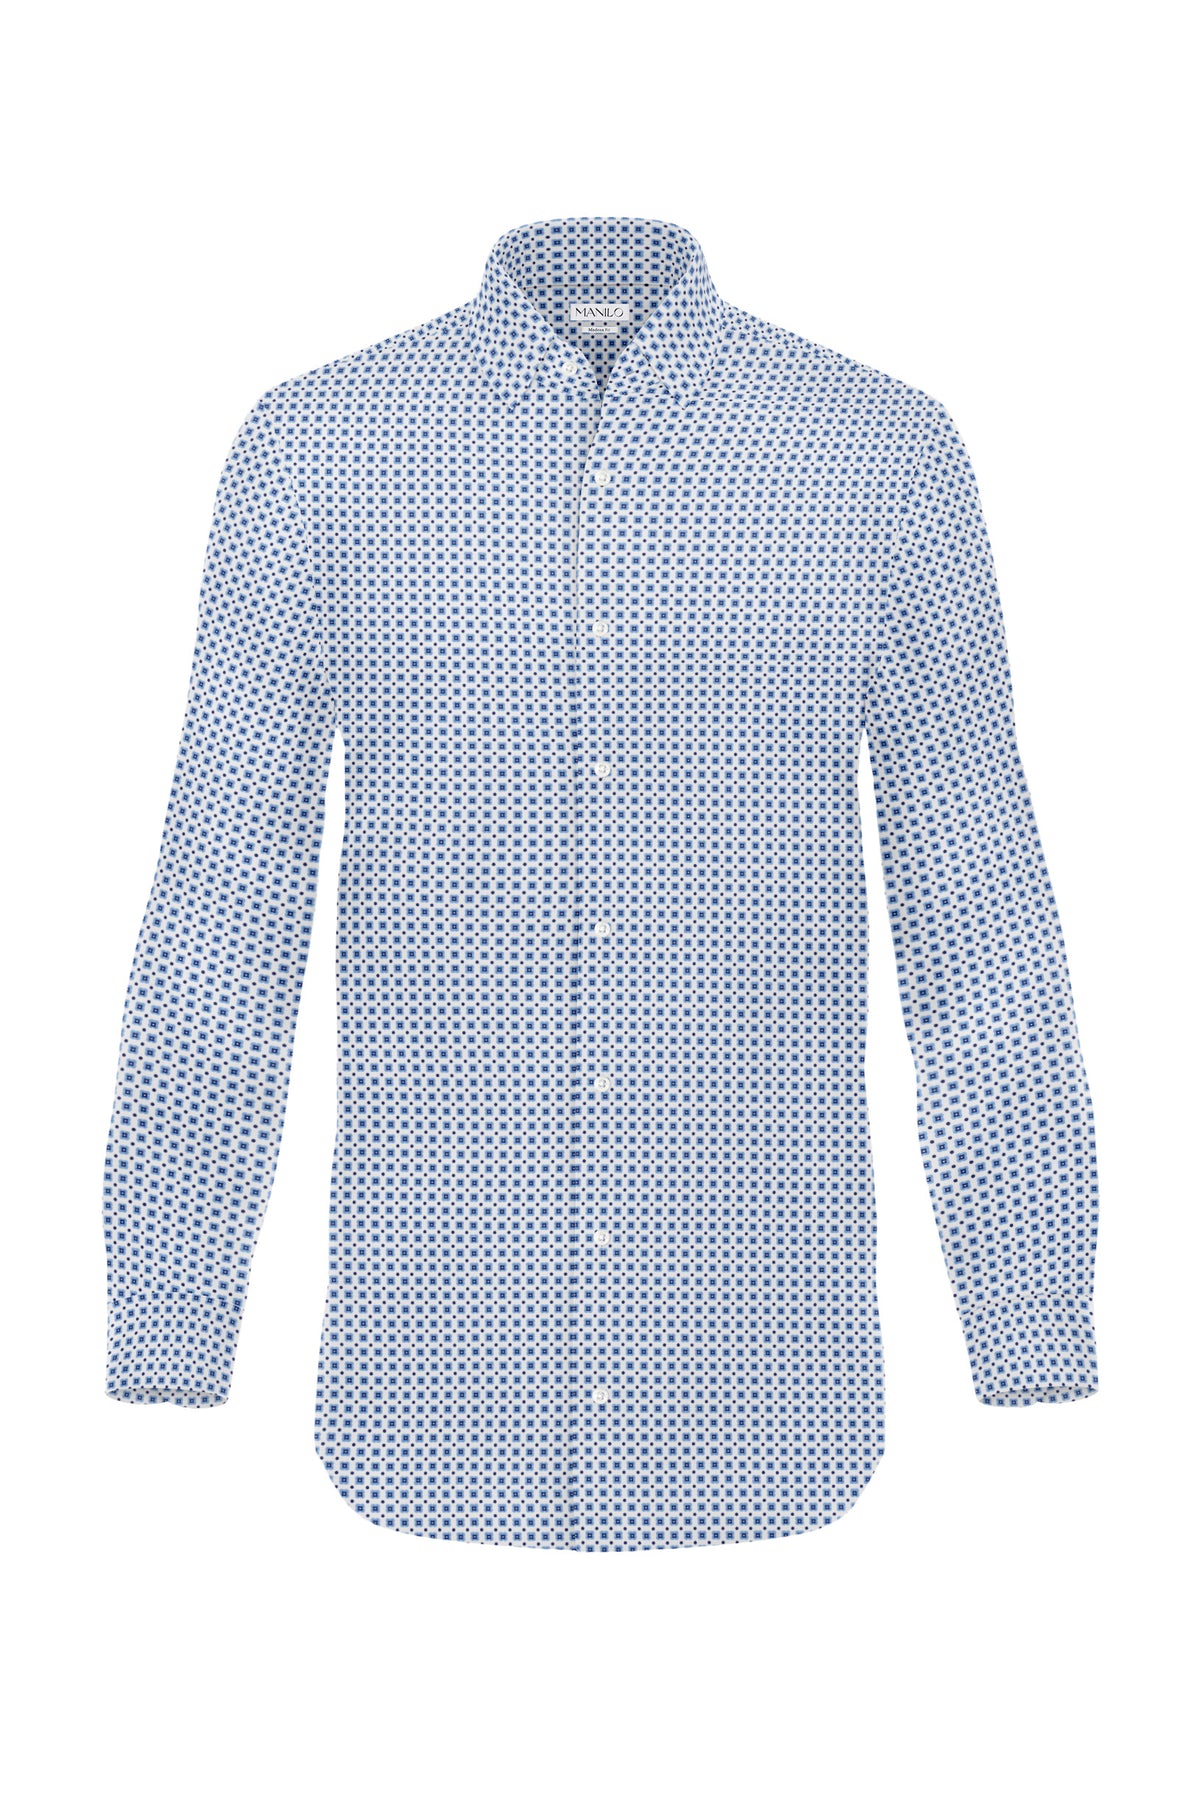 High quality business shirt with print pattern Modern Fit (straight cut / Art. 1162-M)